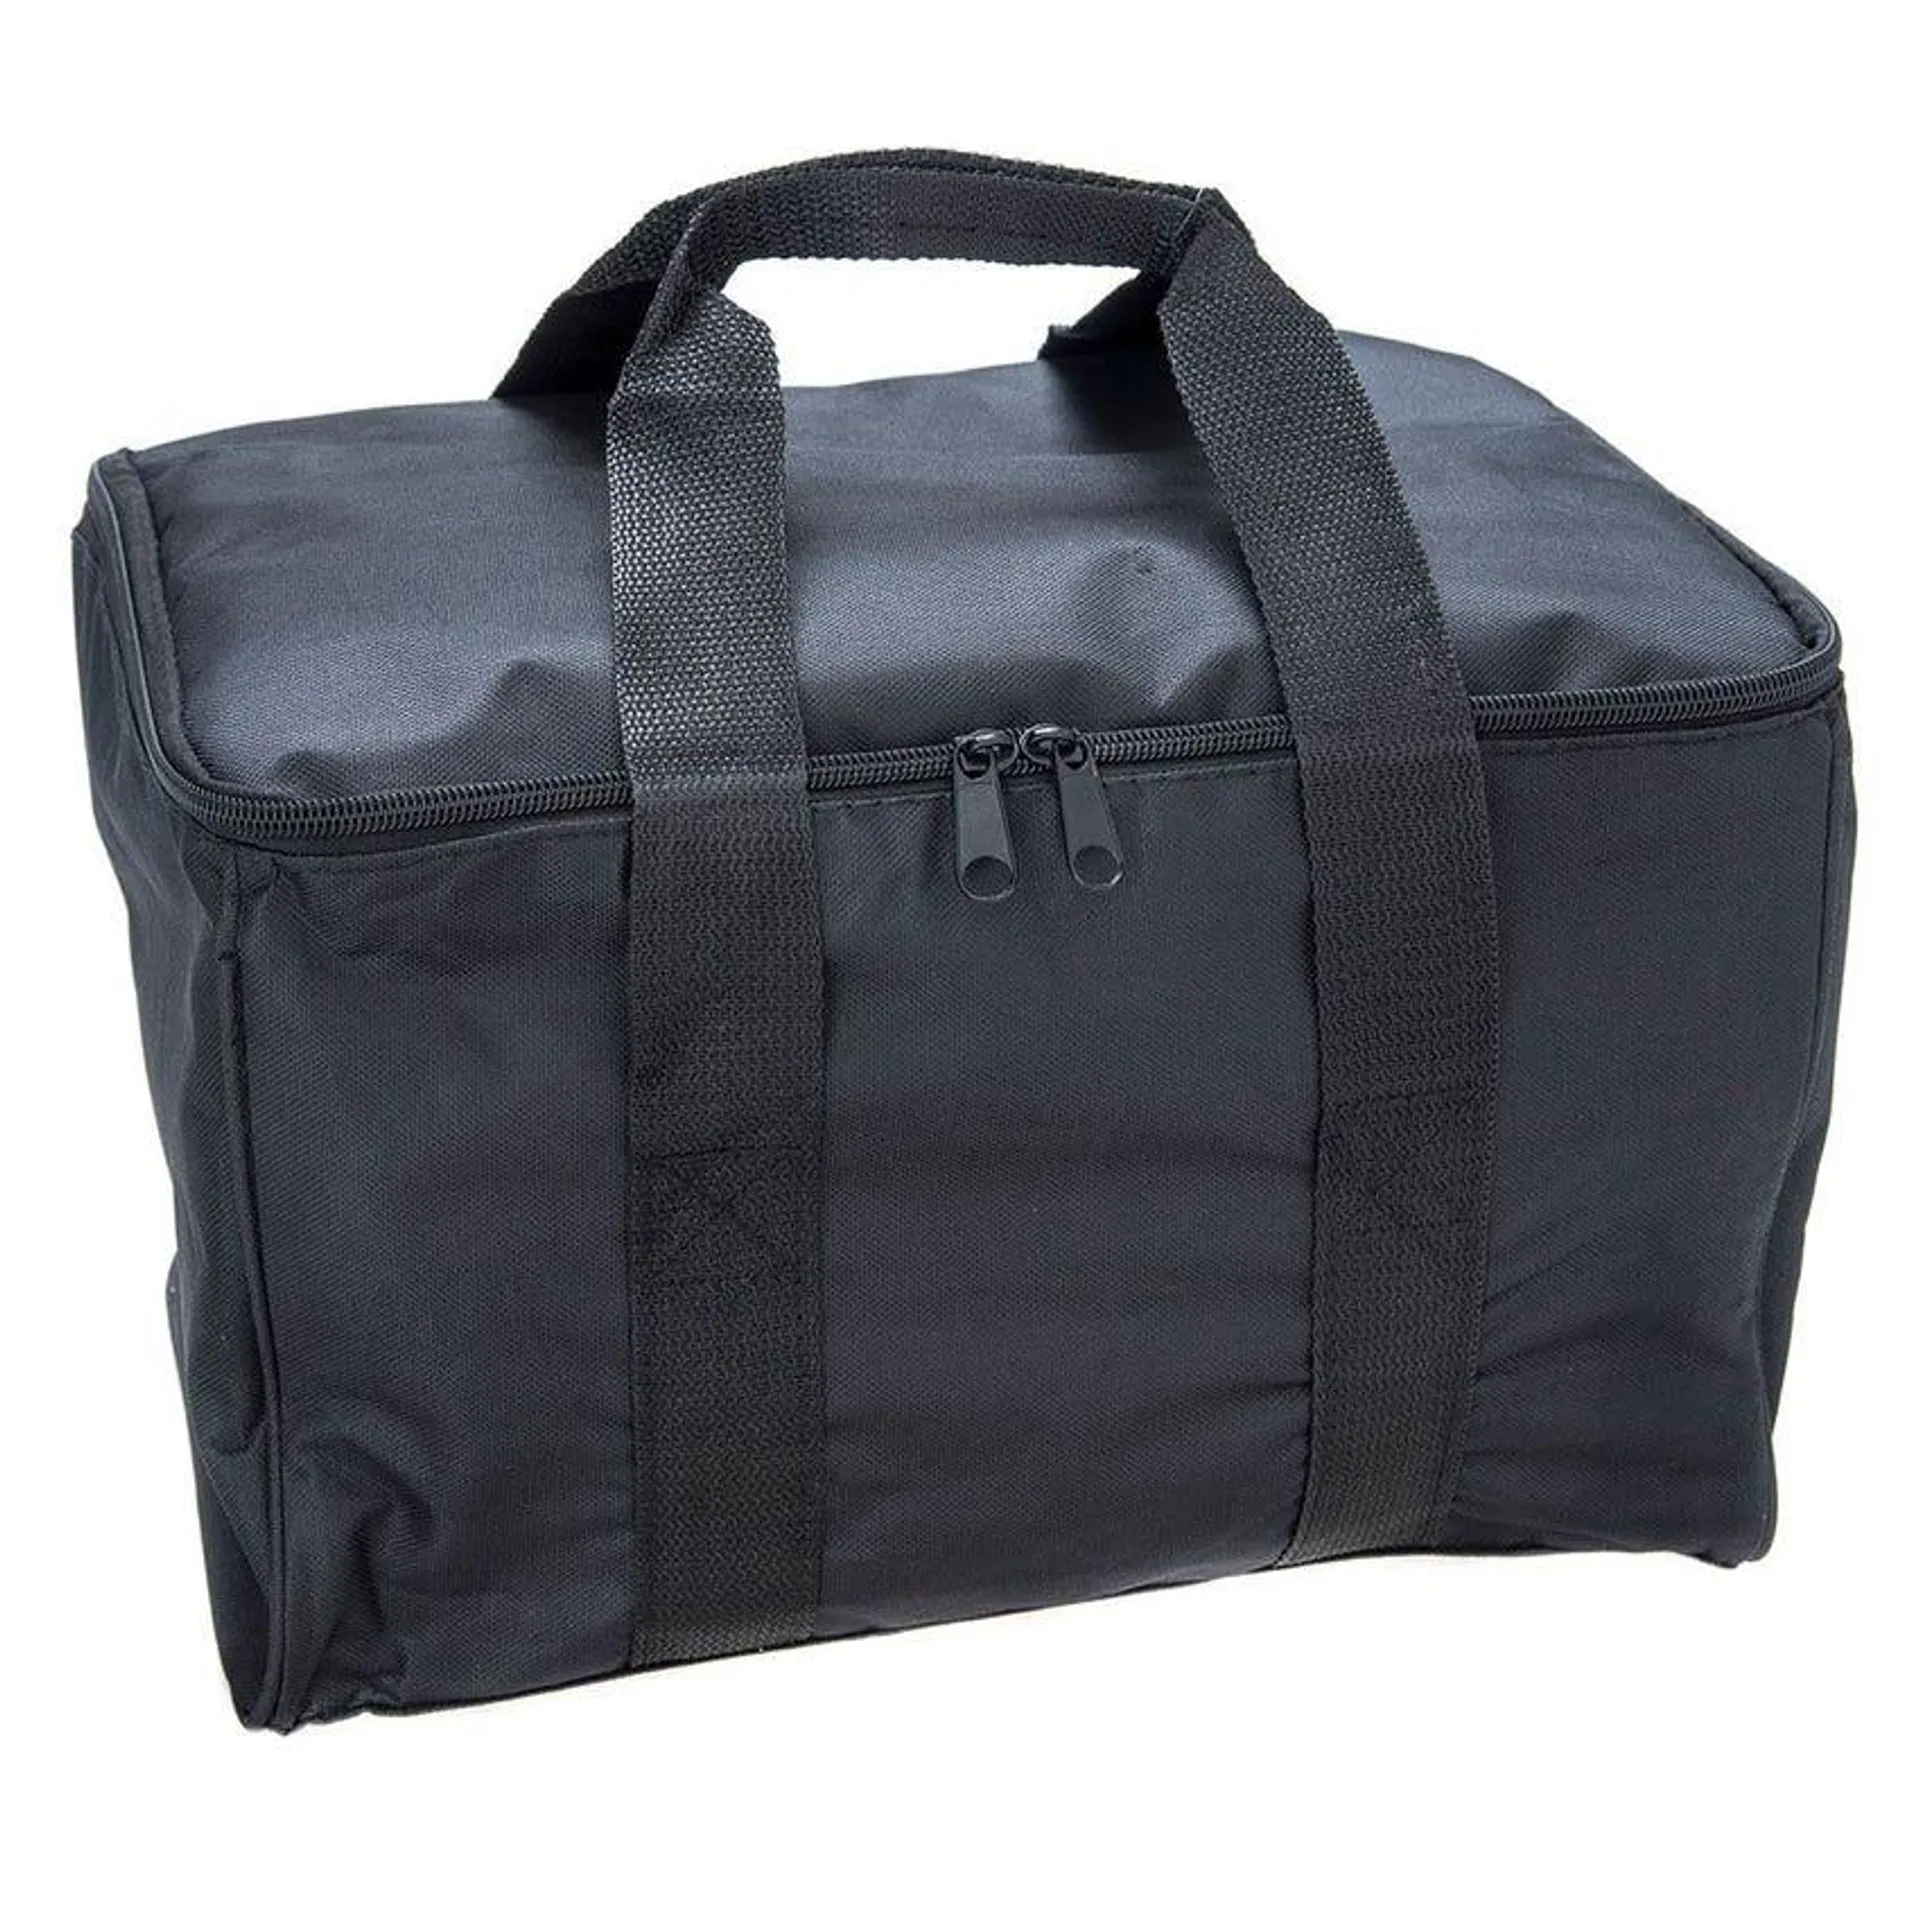 Kings Polyester Air Compressor Bag | Suits All Thumper Air Compressors | 600D Polyester